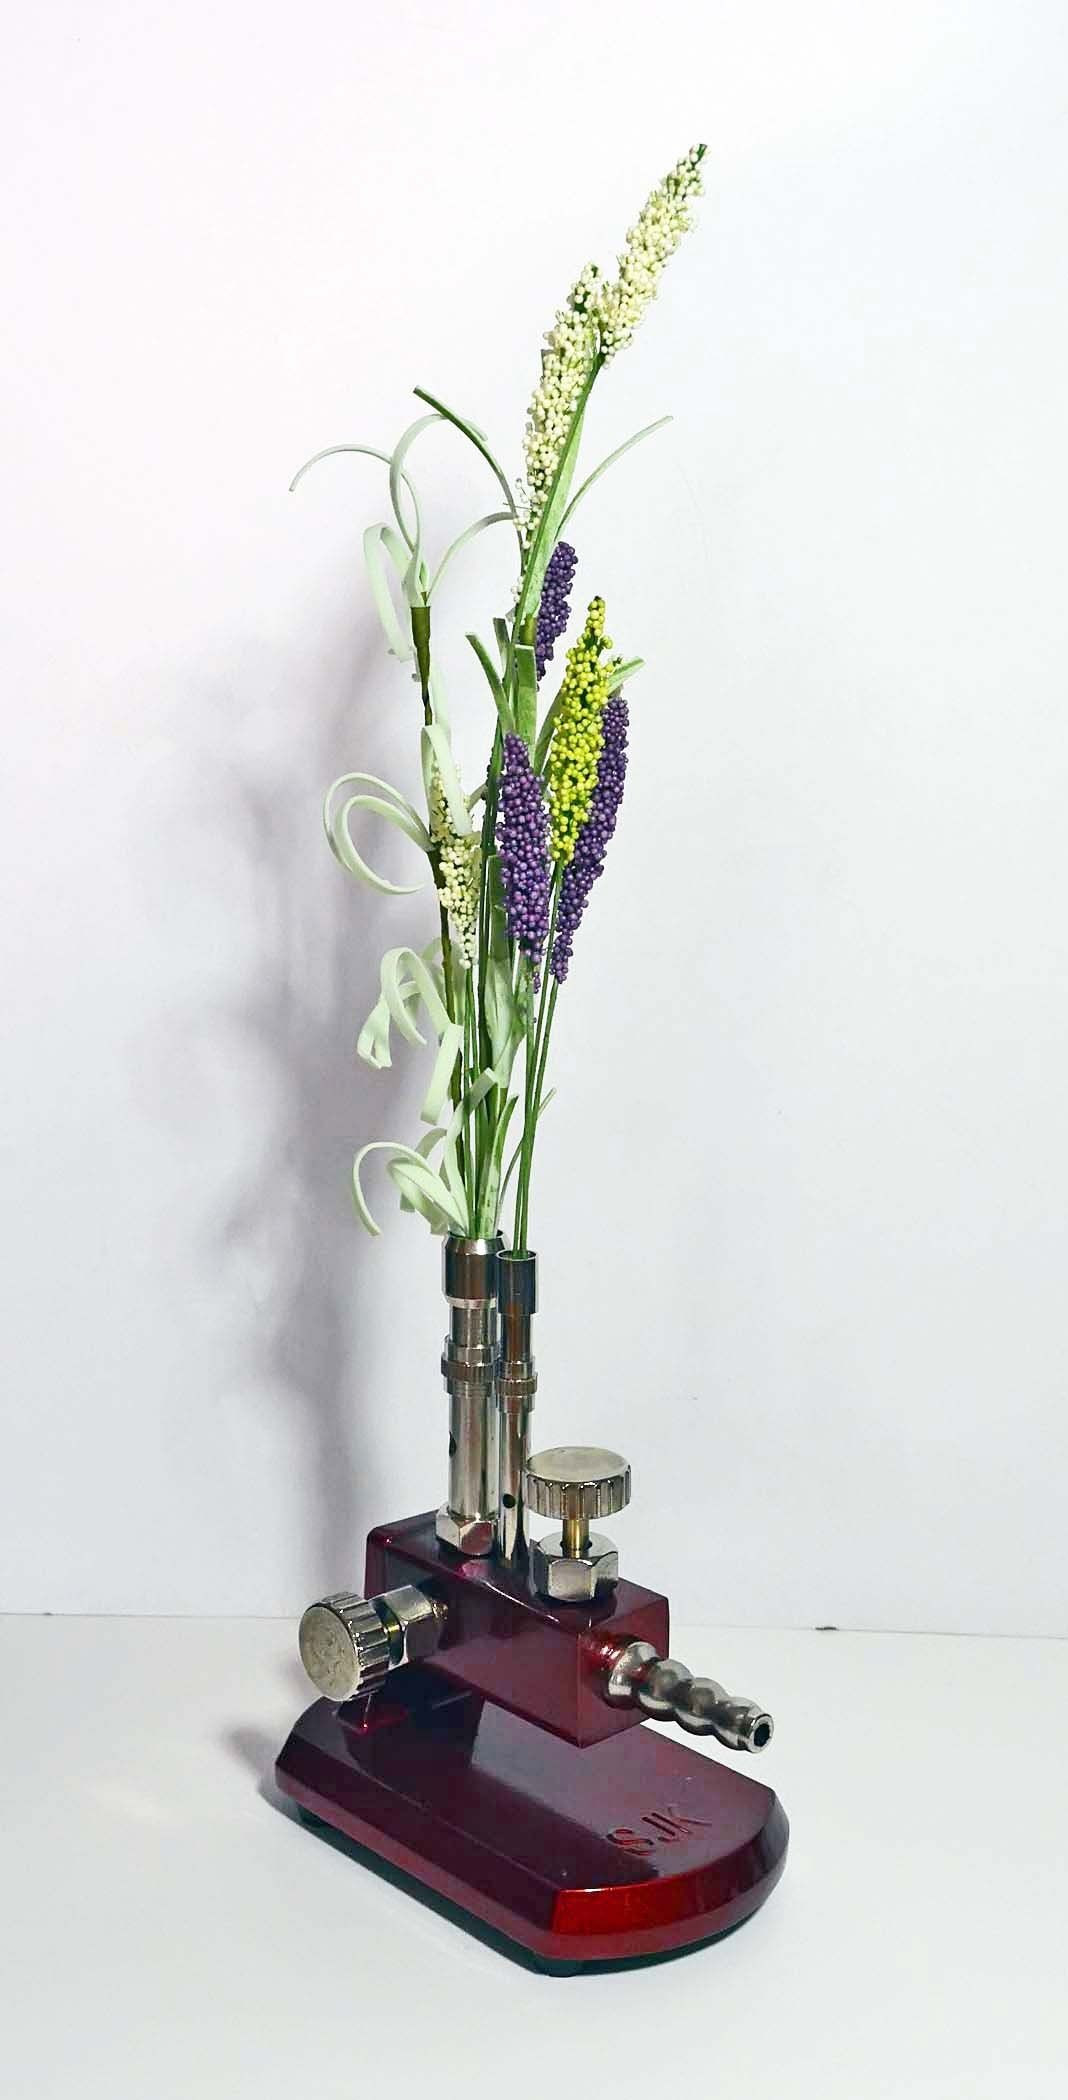 28 Stylish Multi Bud Vase 2024 free download multi bud vase of dried bud vase steampunk style decorative made from recycled intended for dried bud vase steampunk style decorative made from recycled materialsred dental lab bunsen burner